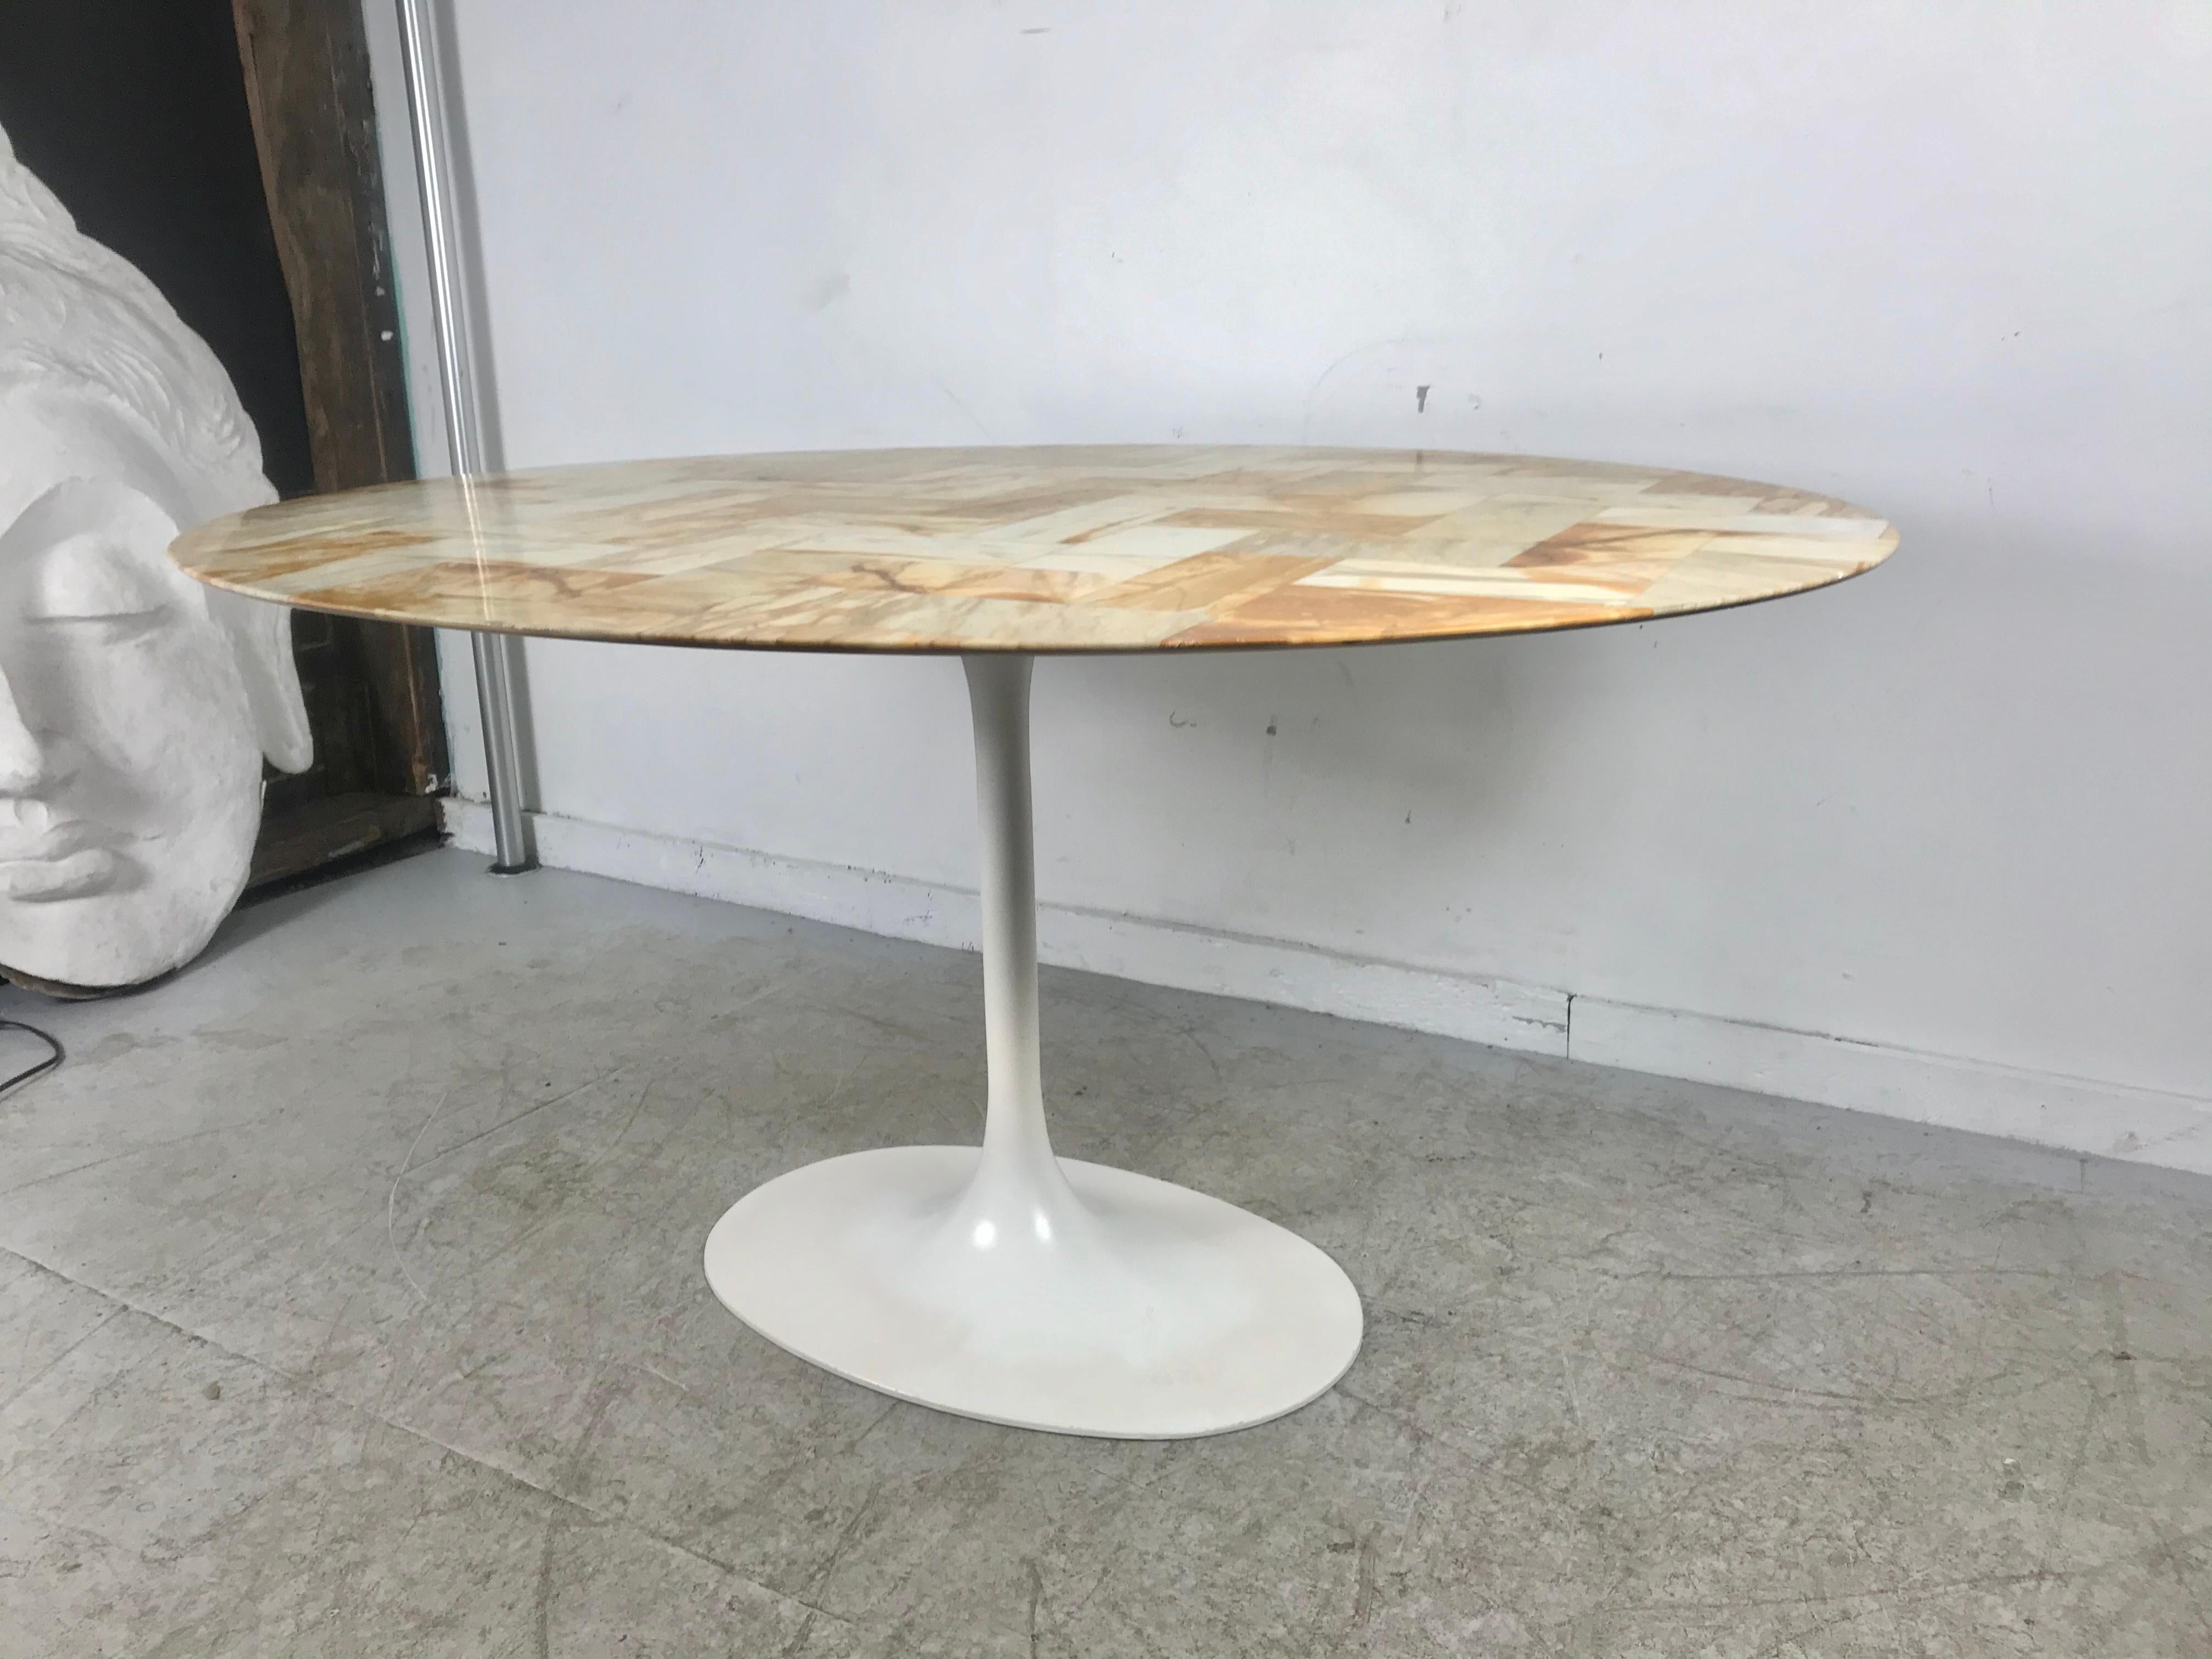 Painted Stunning Oval Patchwork Marble Saarinen /Knoll Style Tulip Pedestal Dining Table